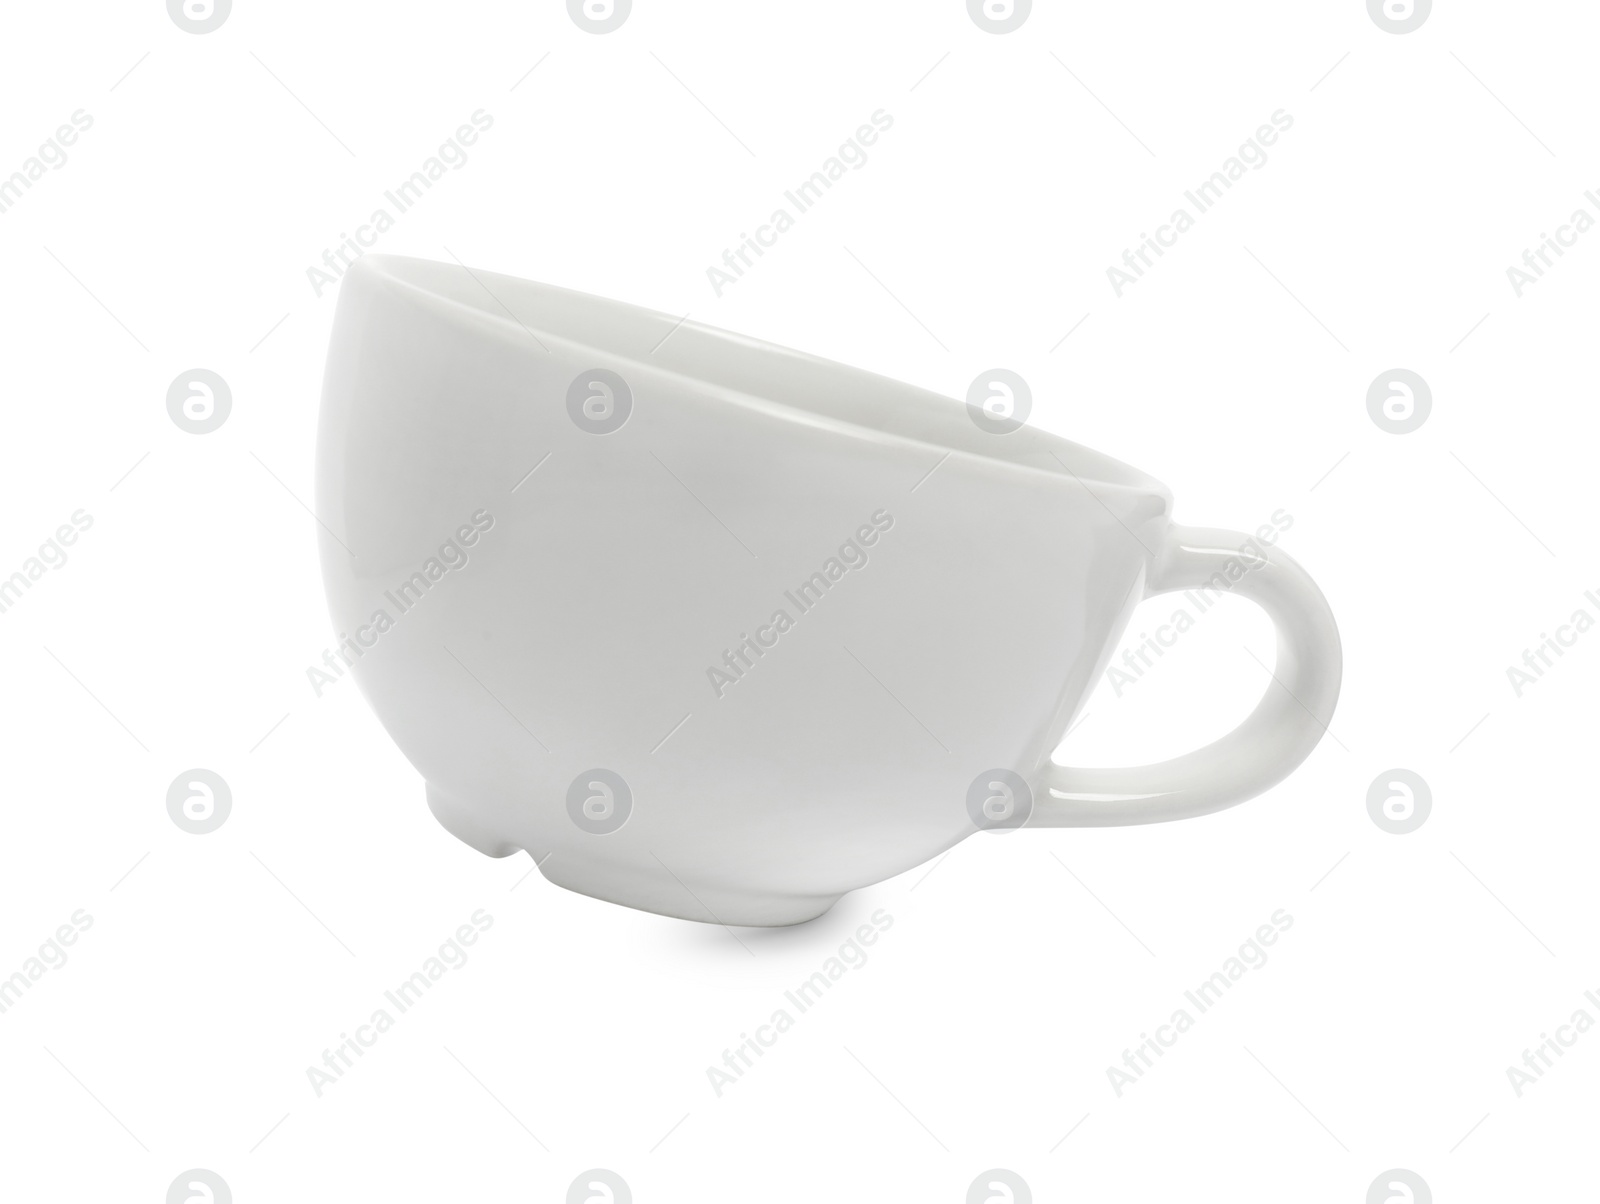 Photo of One new ceramic cup isolated on white